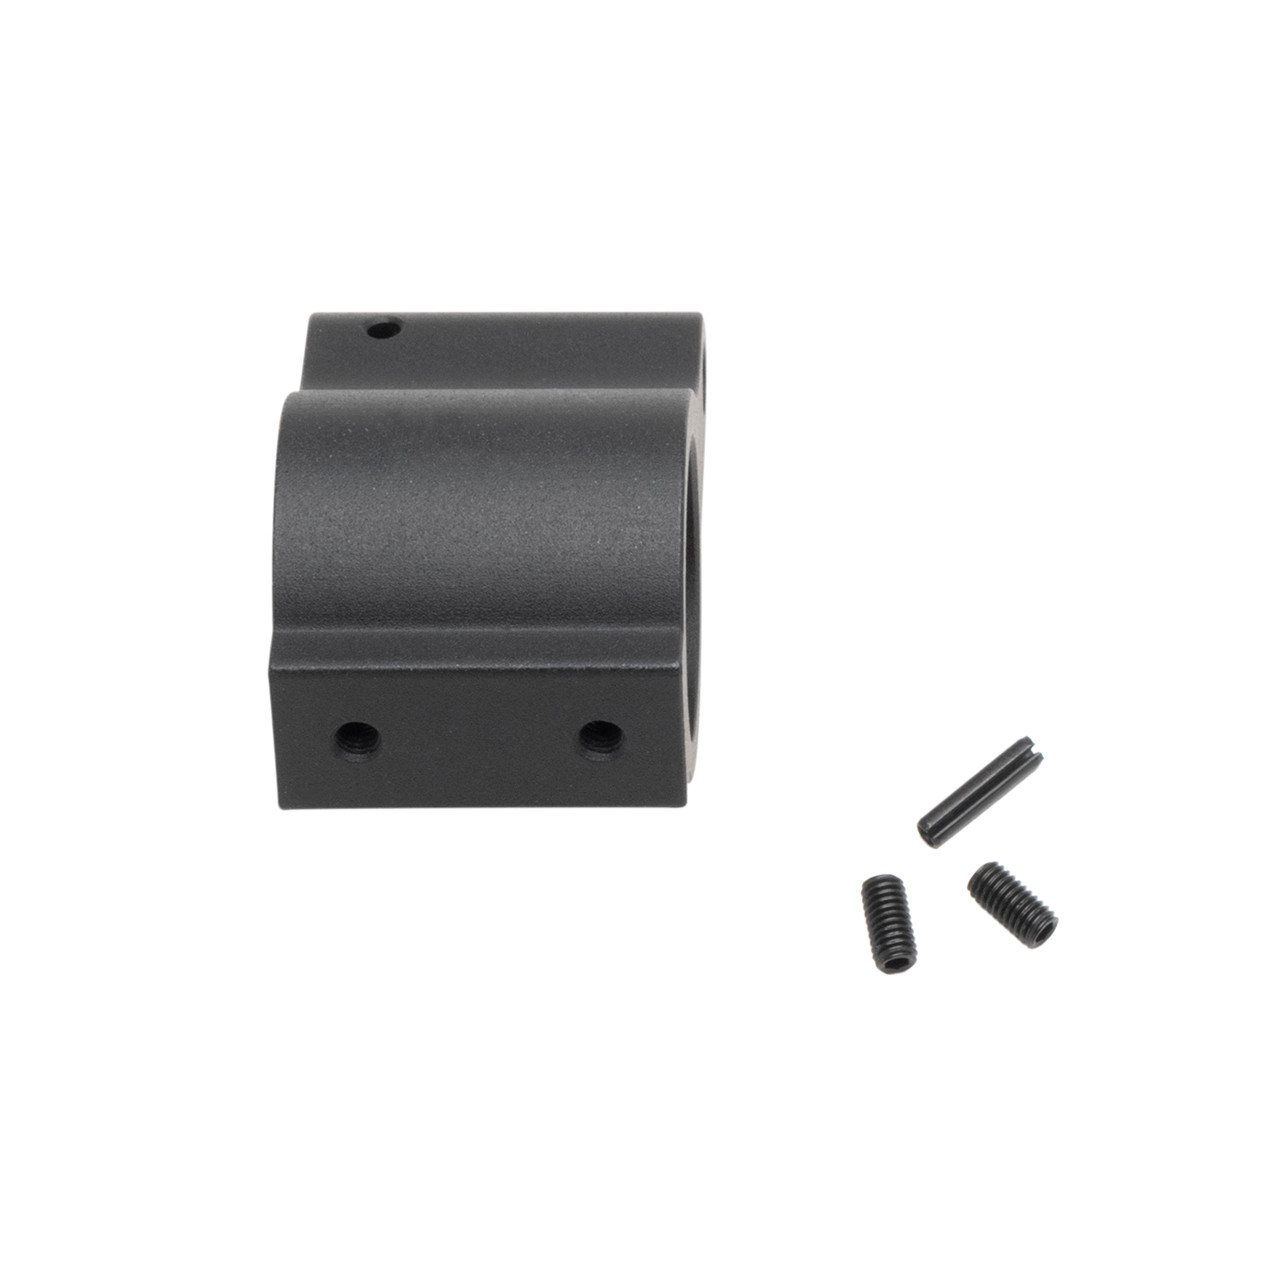 Shop Trident M4 AEG Low Profile Gas Block - $ 25 - Krytac.com | For Airsoft Use Only.